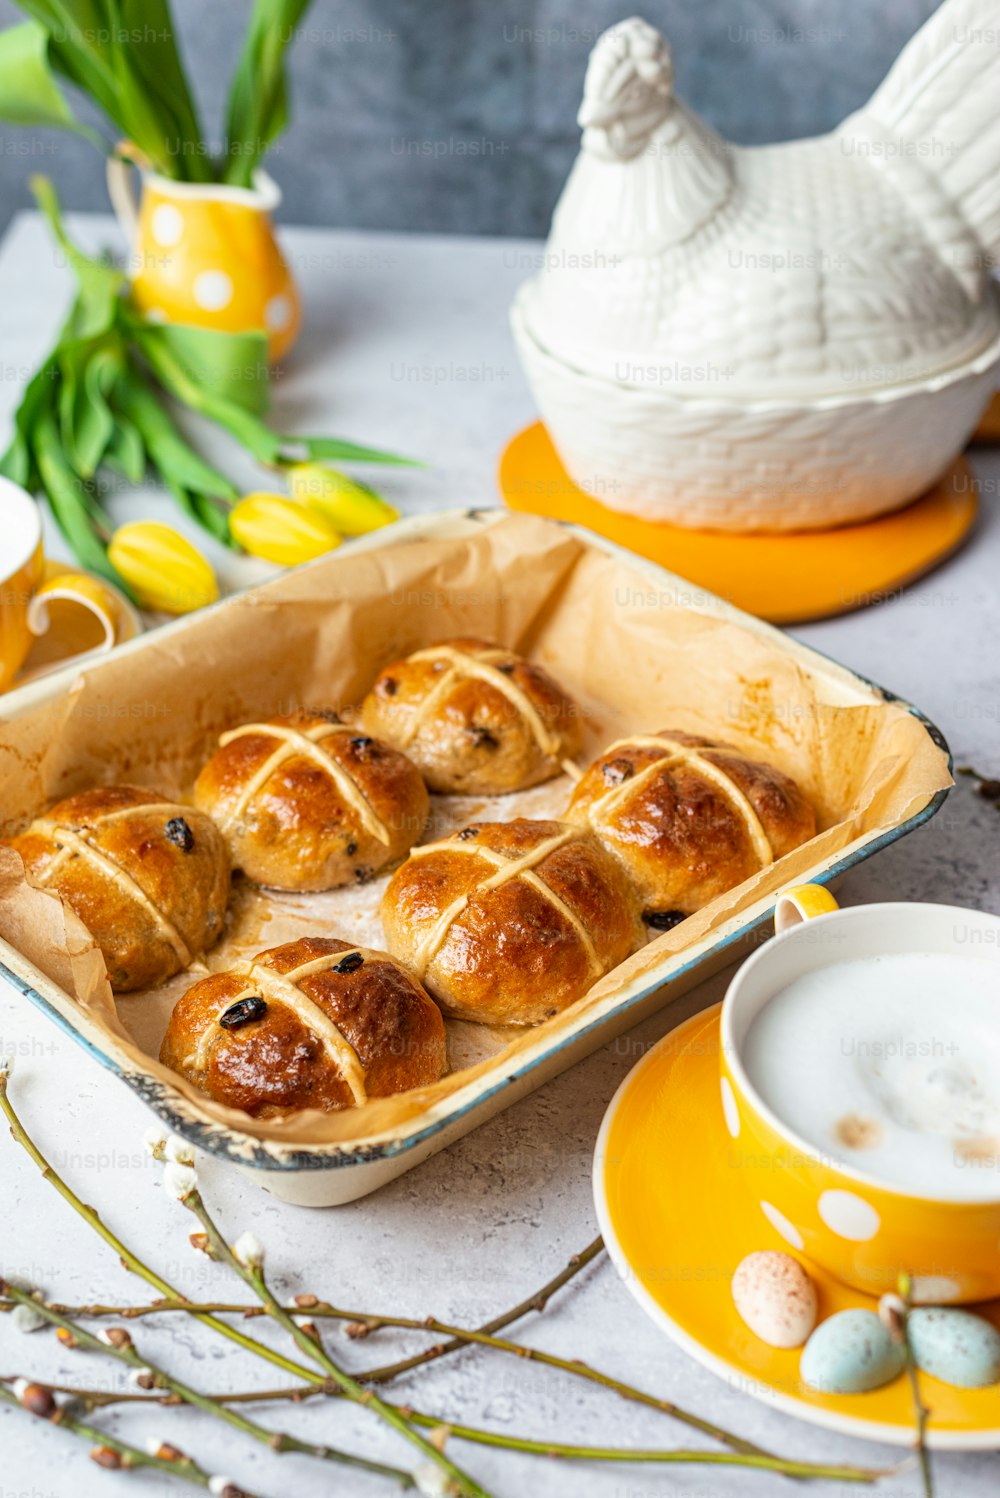 a pan of hot cross buns on a table